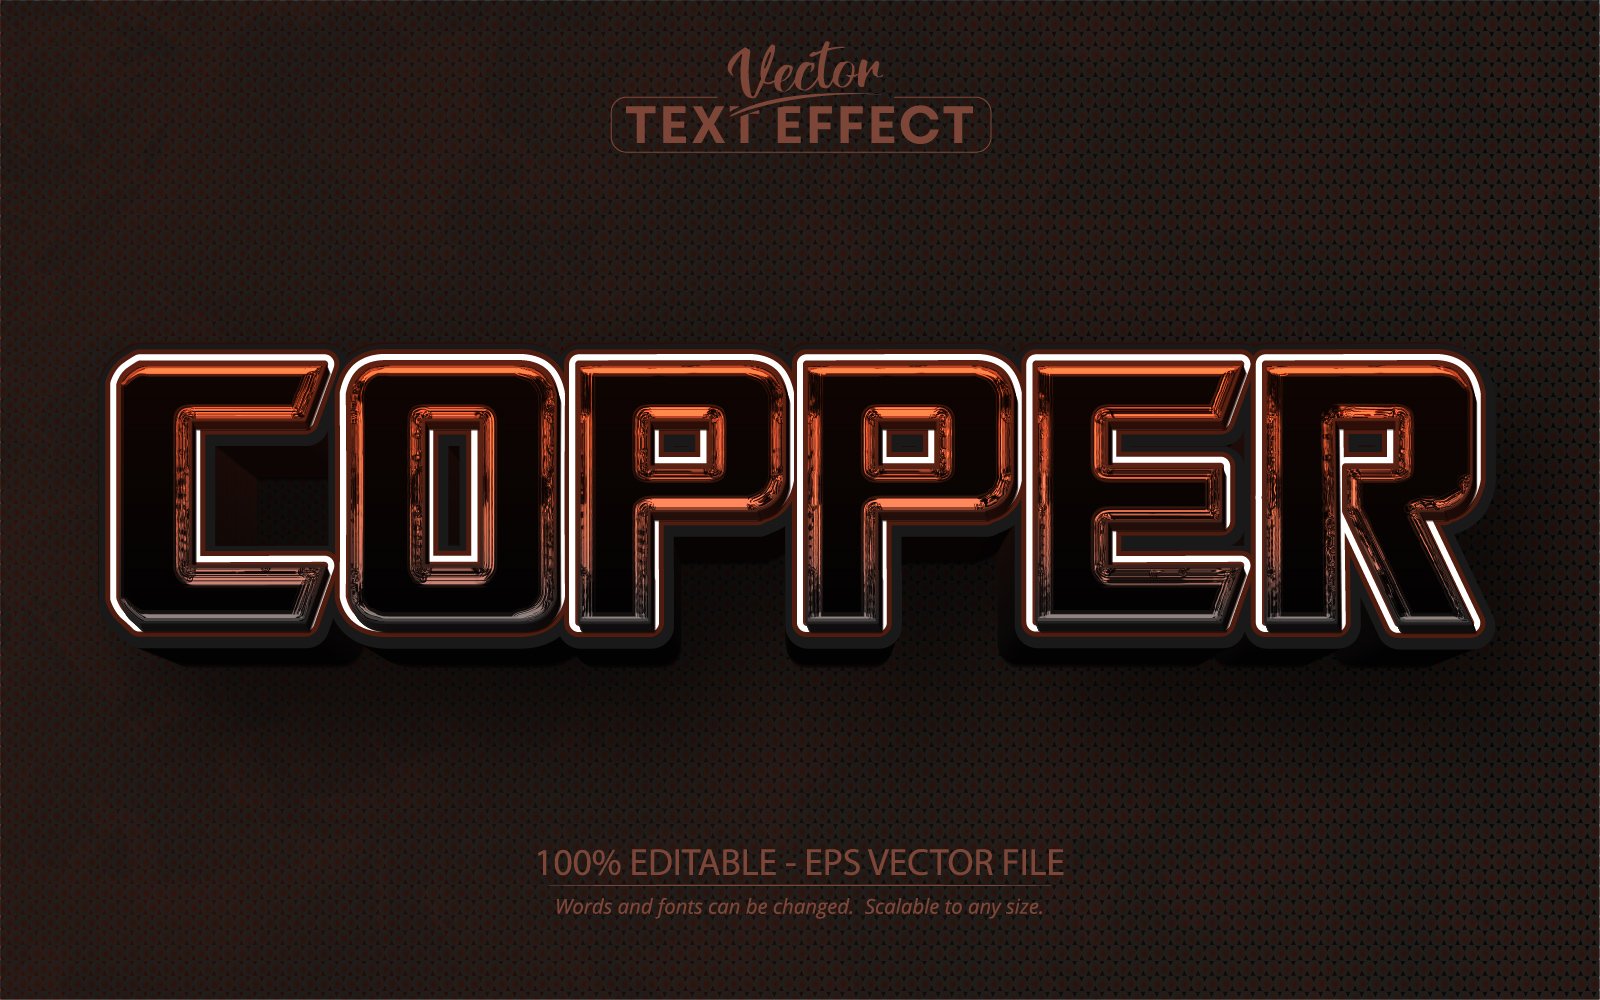 Copper - Editable Text Effect, Metal And Brown Color Text Style, Graphics Illustration